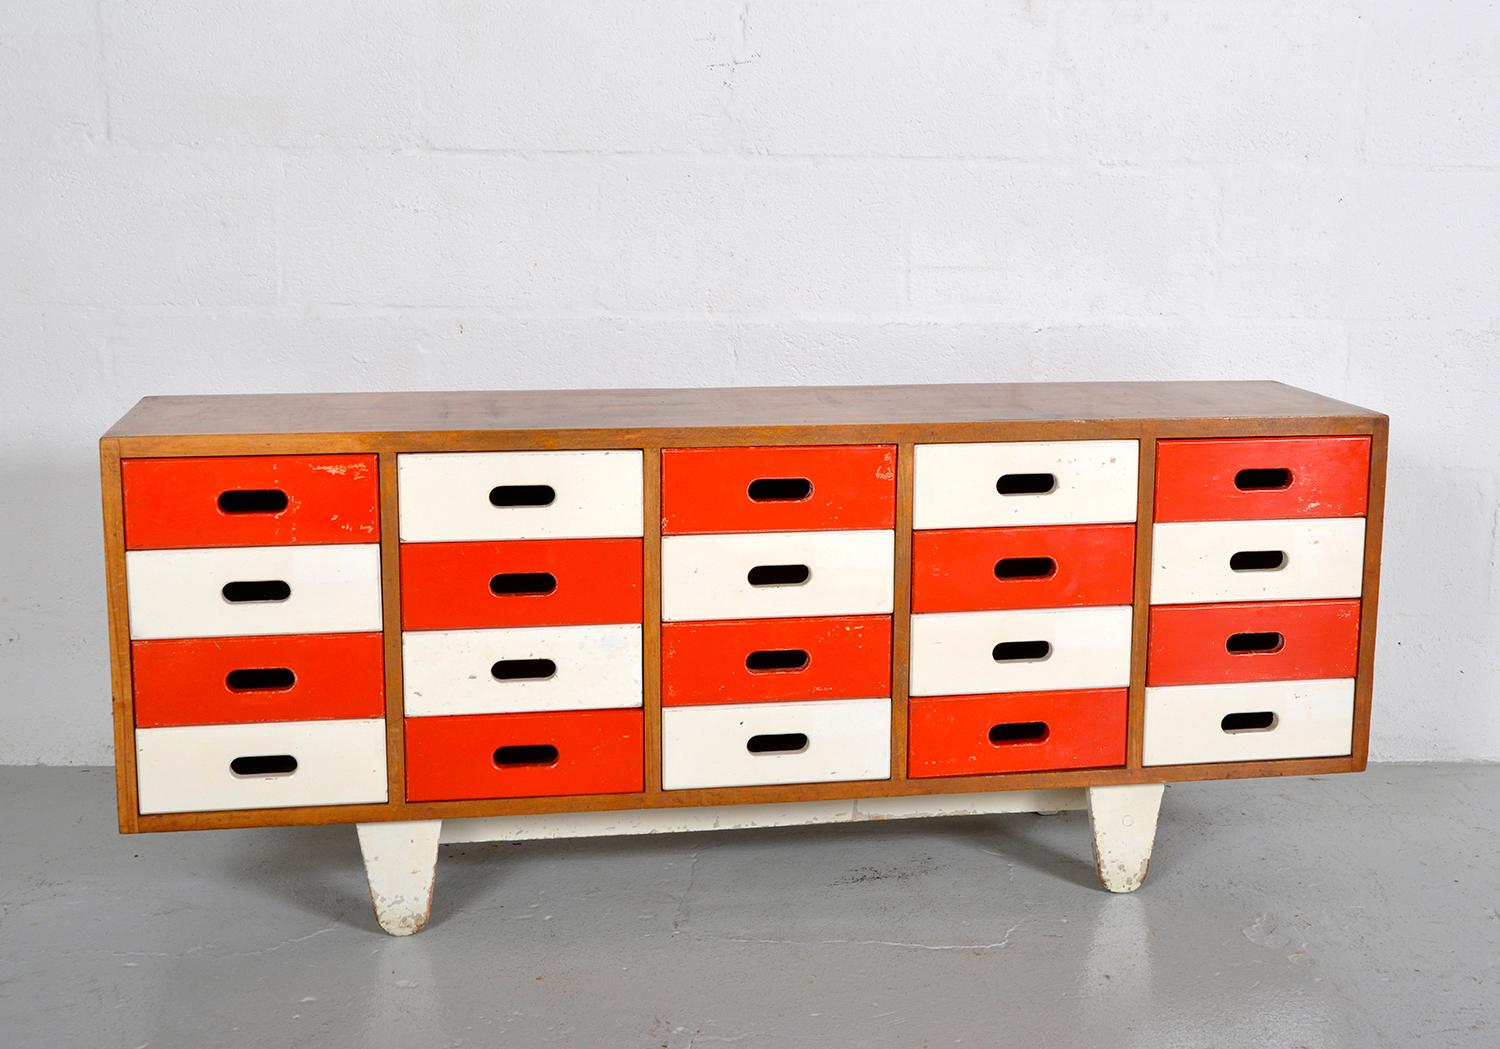 A wonderful bank of drawers designed by James Leonard for Esavian Esa (Educational Supply Association), a leading UK supplier of school furniture. This is a rarely seen 5 x 4 multi-drawer arrangement, as apposed to the most common 4 x 5. 
Sat on